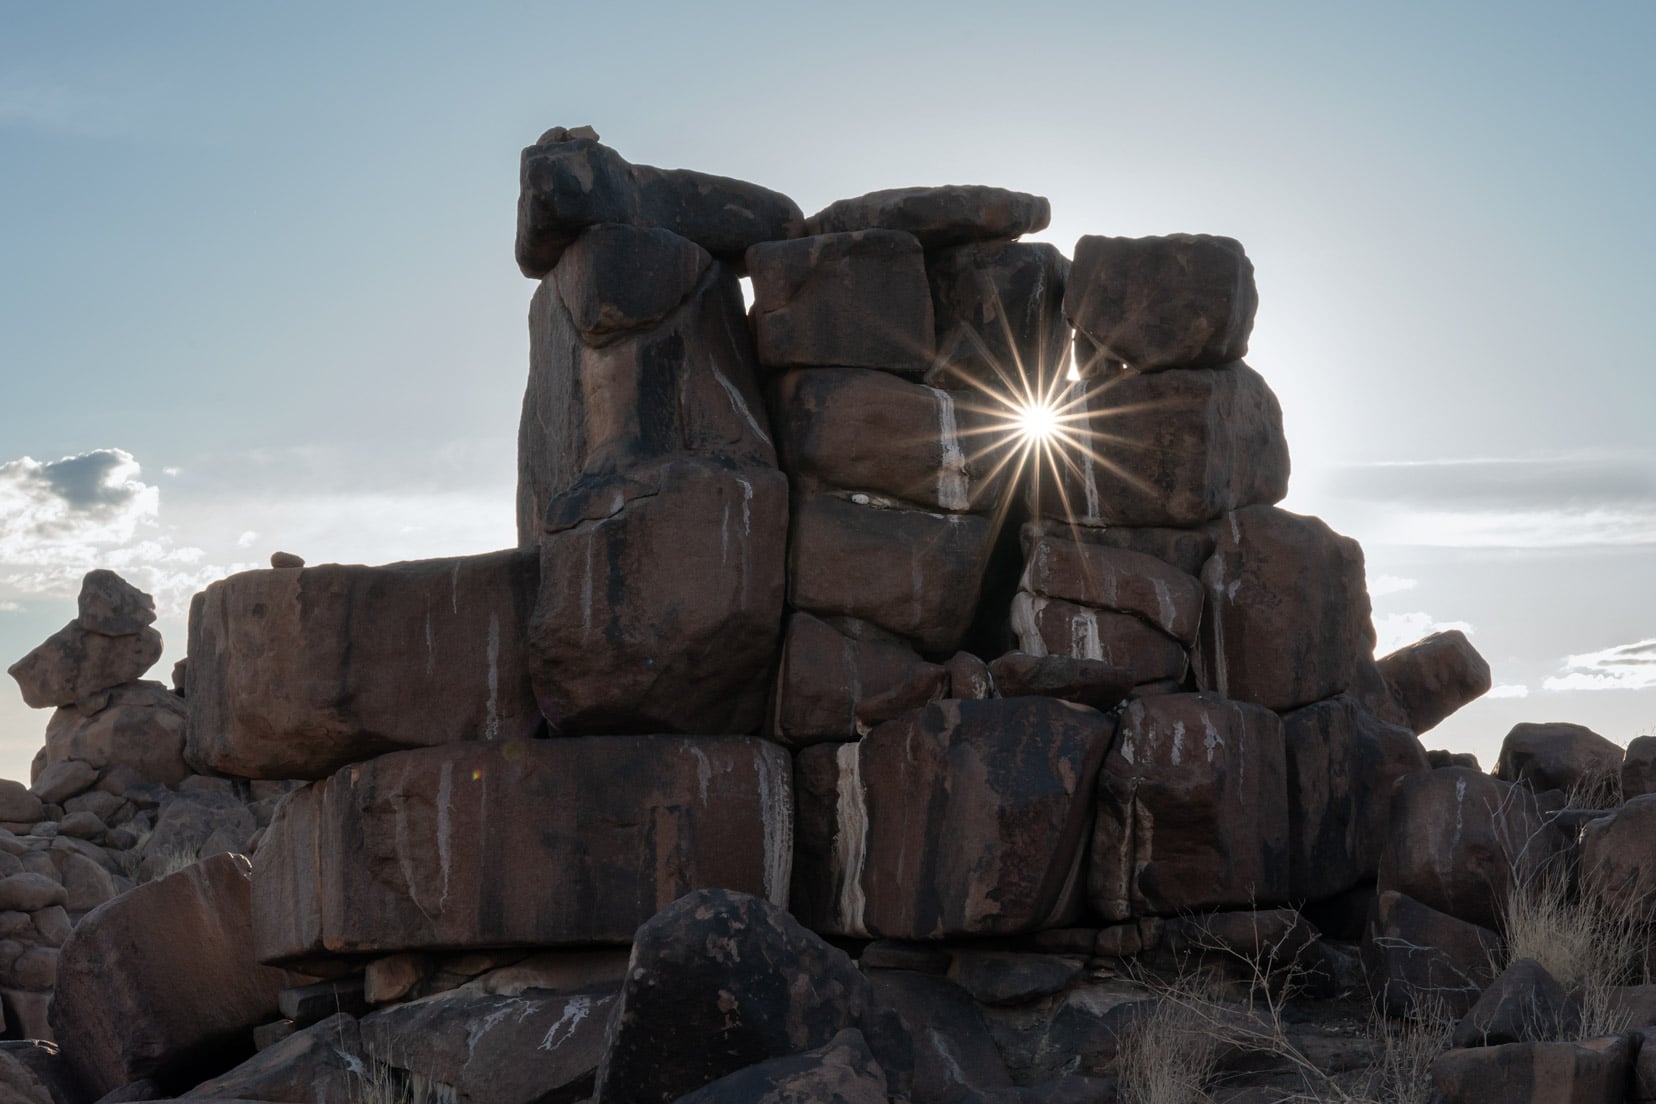 Sun flare peeping through the rock formations